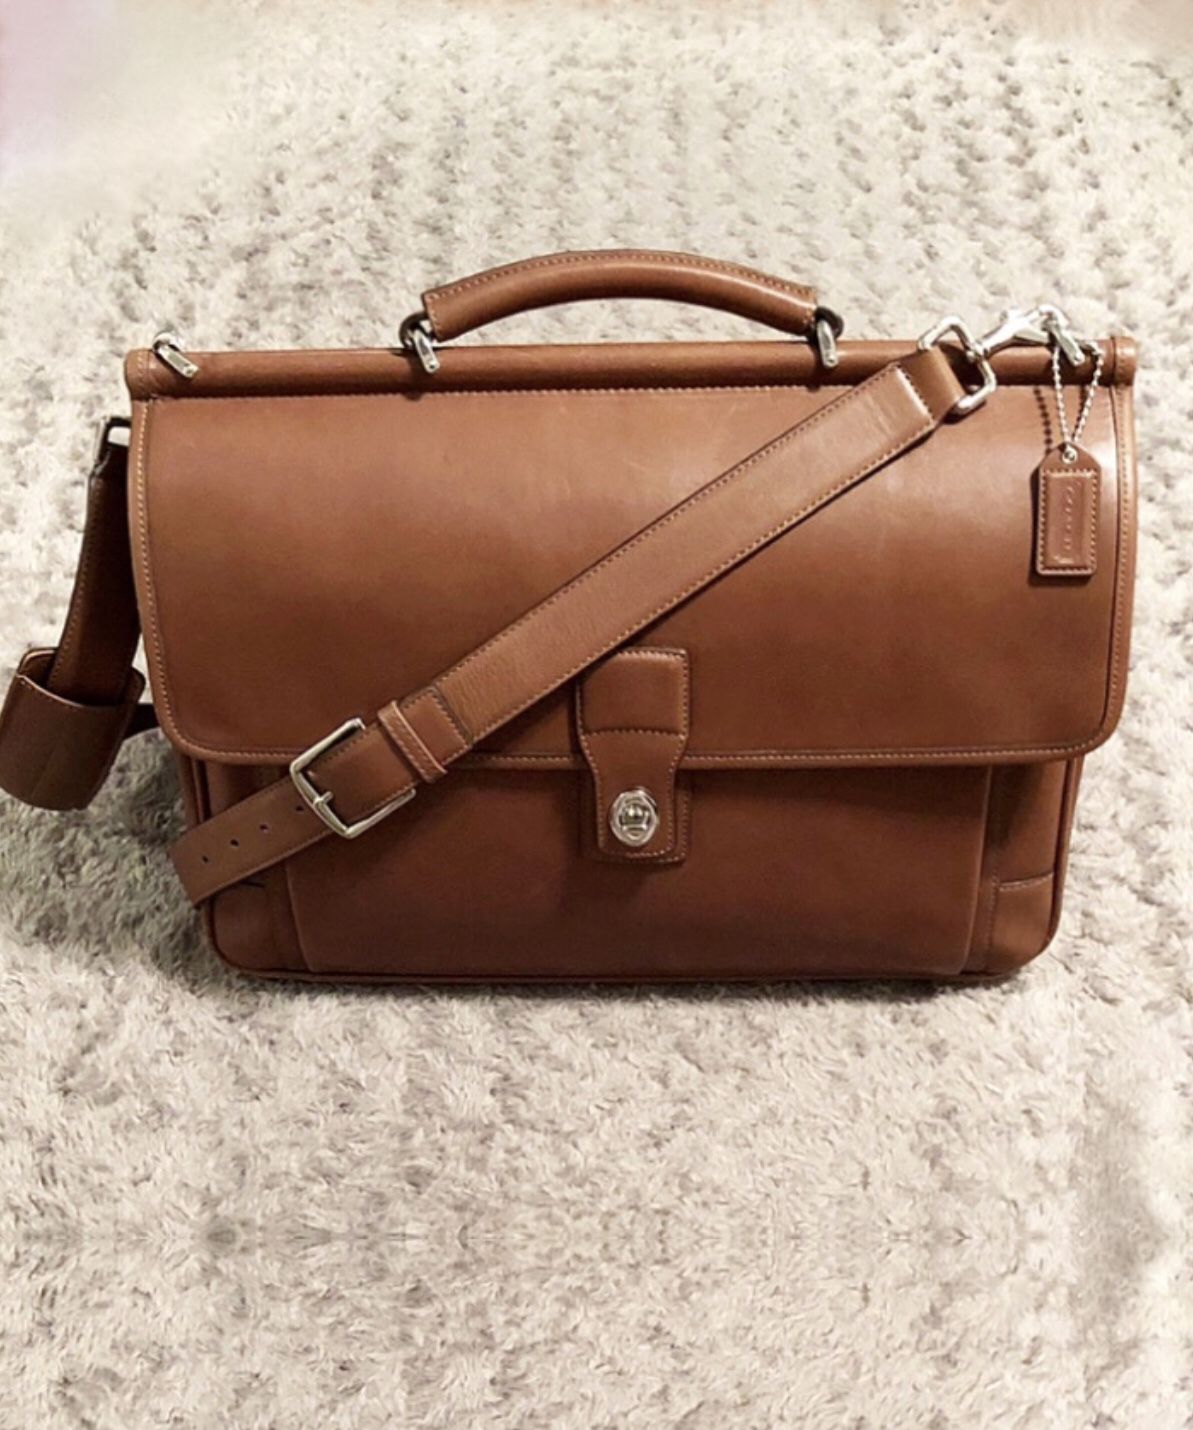 Men’s Coach Barclay briefcase paid $598 Like new!